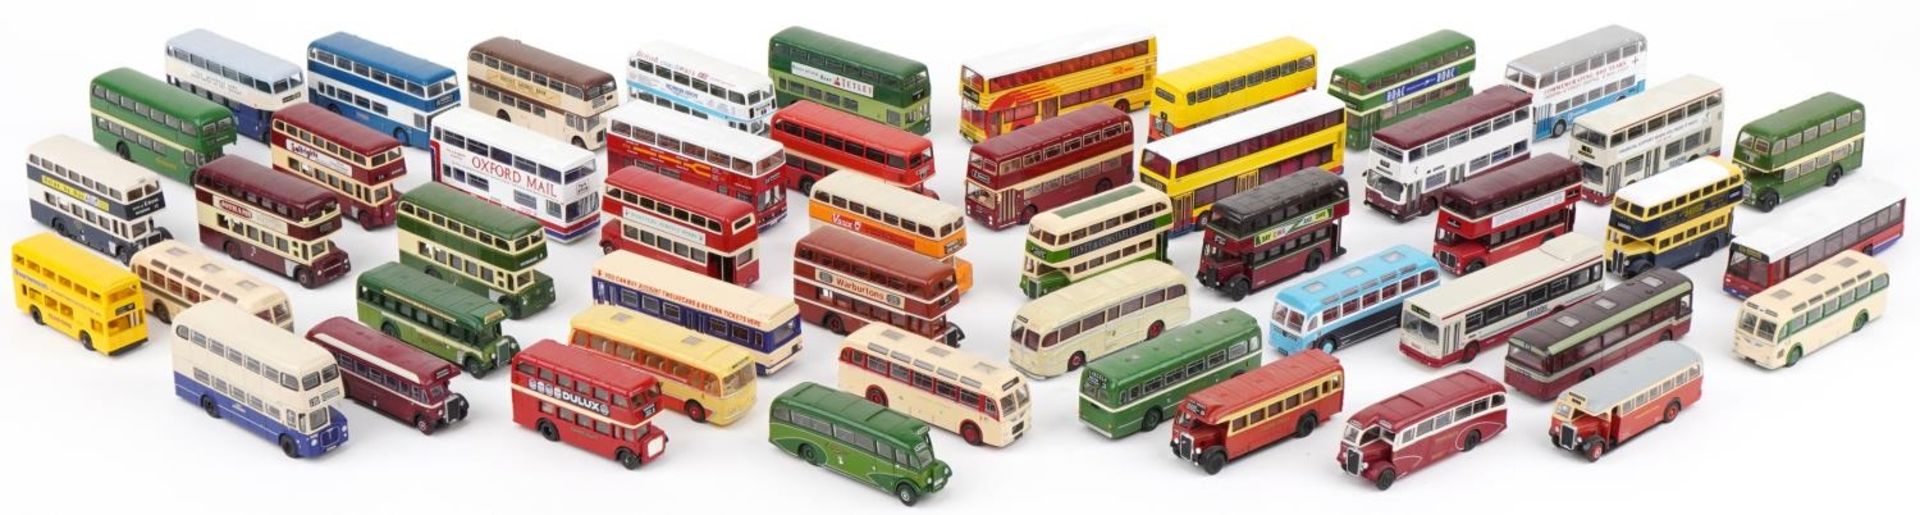 Large collection of diecast model buses, predominantly Corgi and Exclusive First Editions